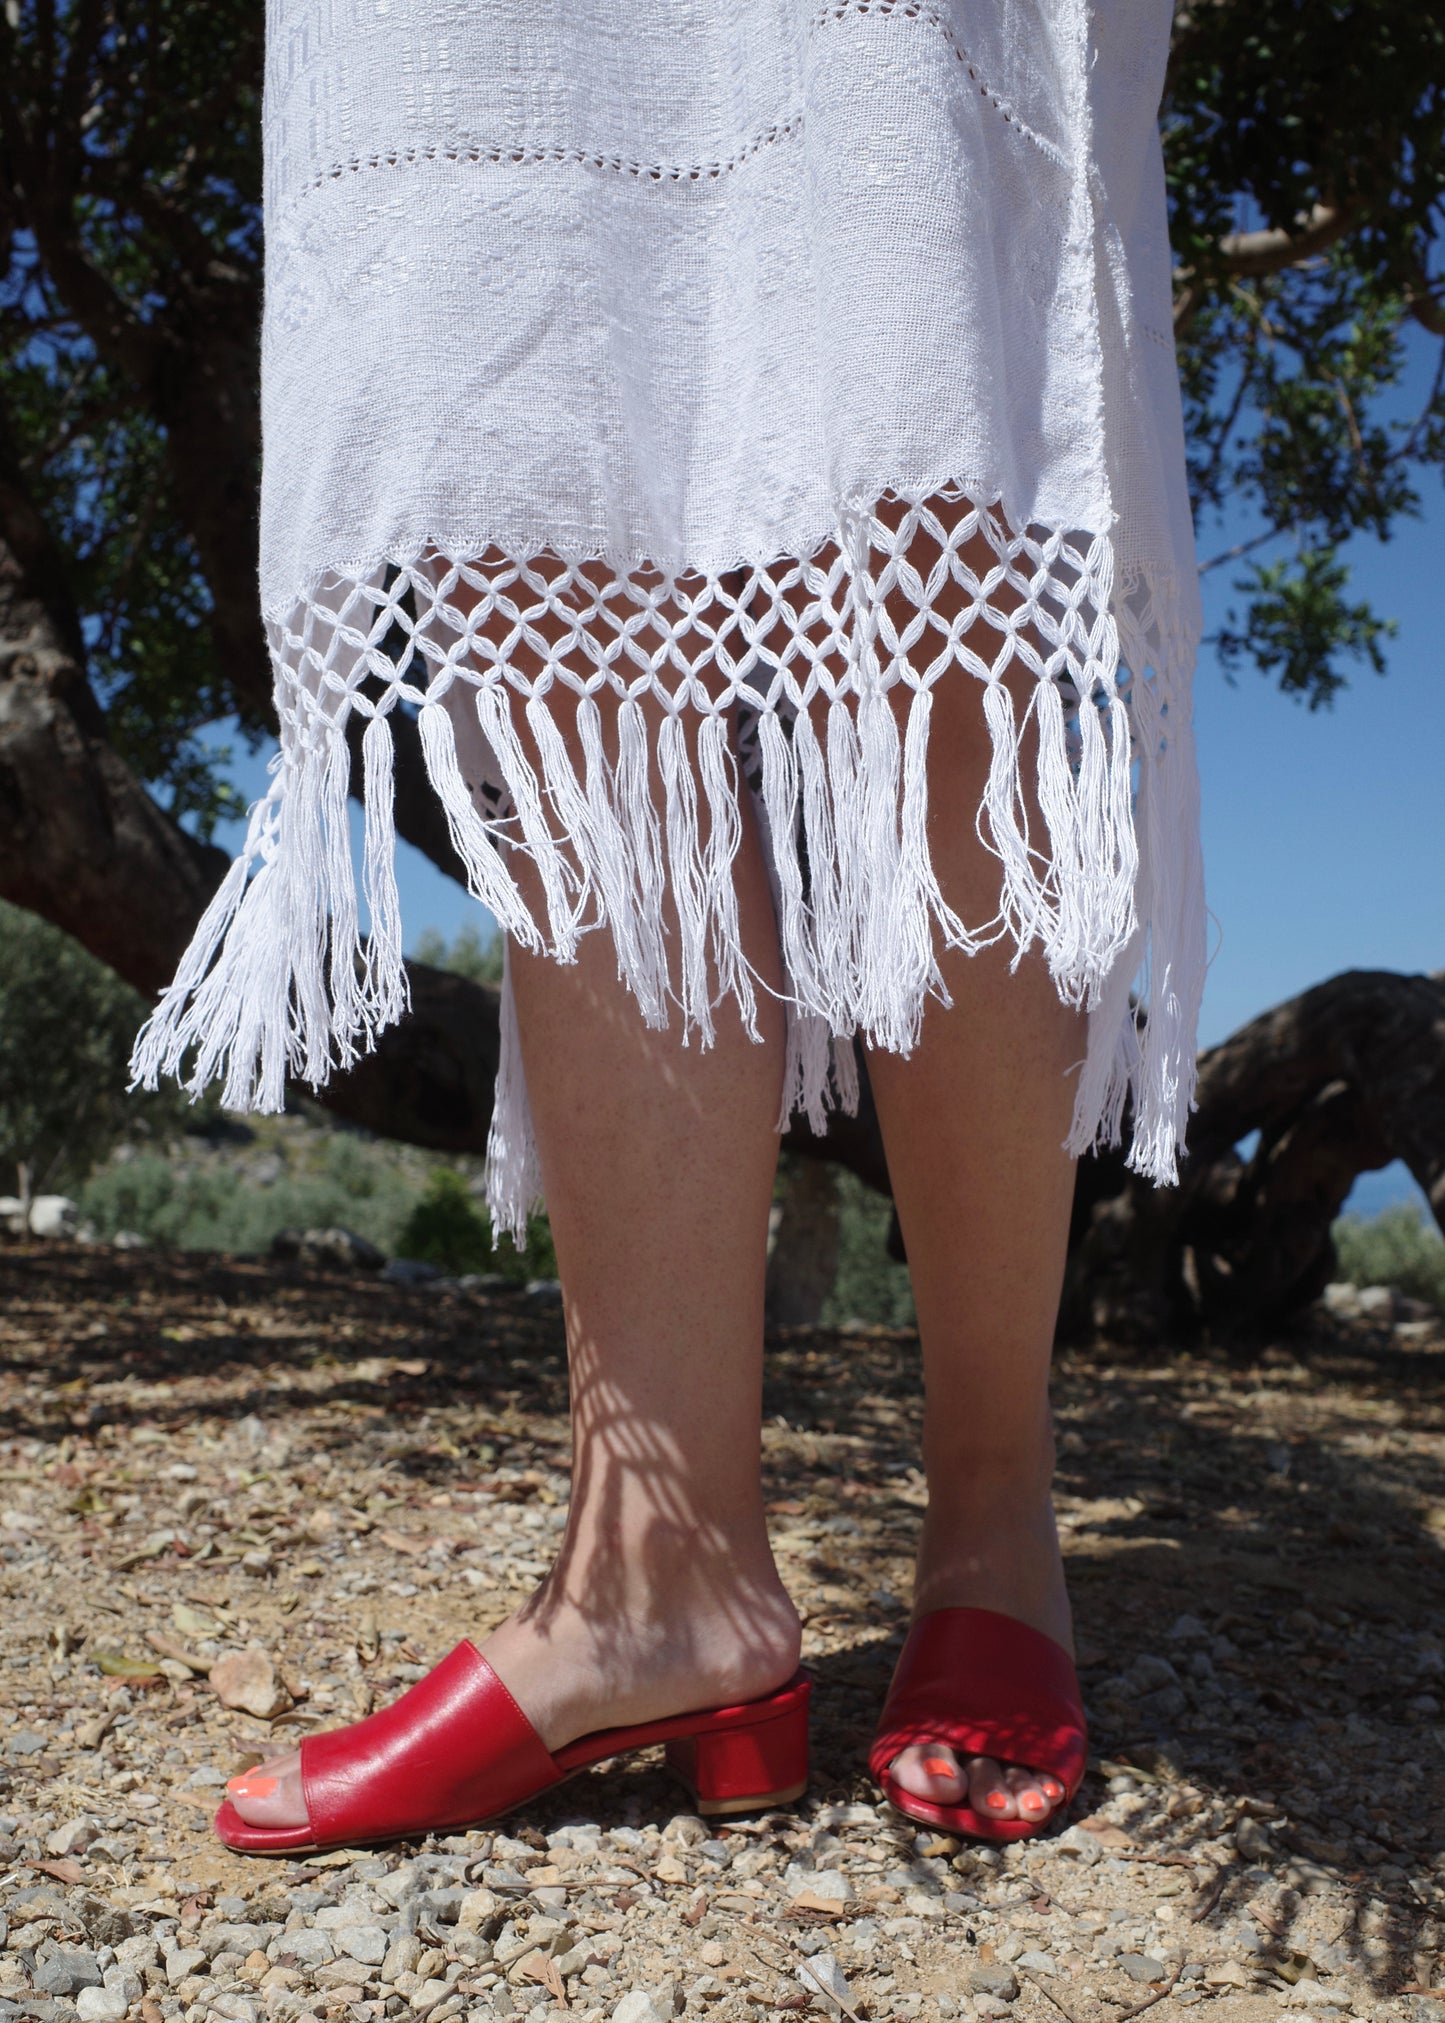 Handmade Mexican Embroidered White Cotton Dress